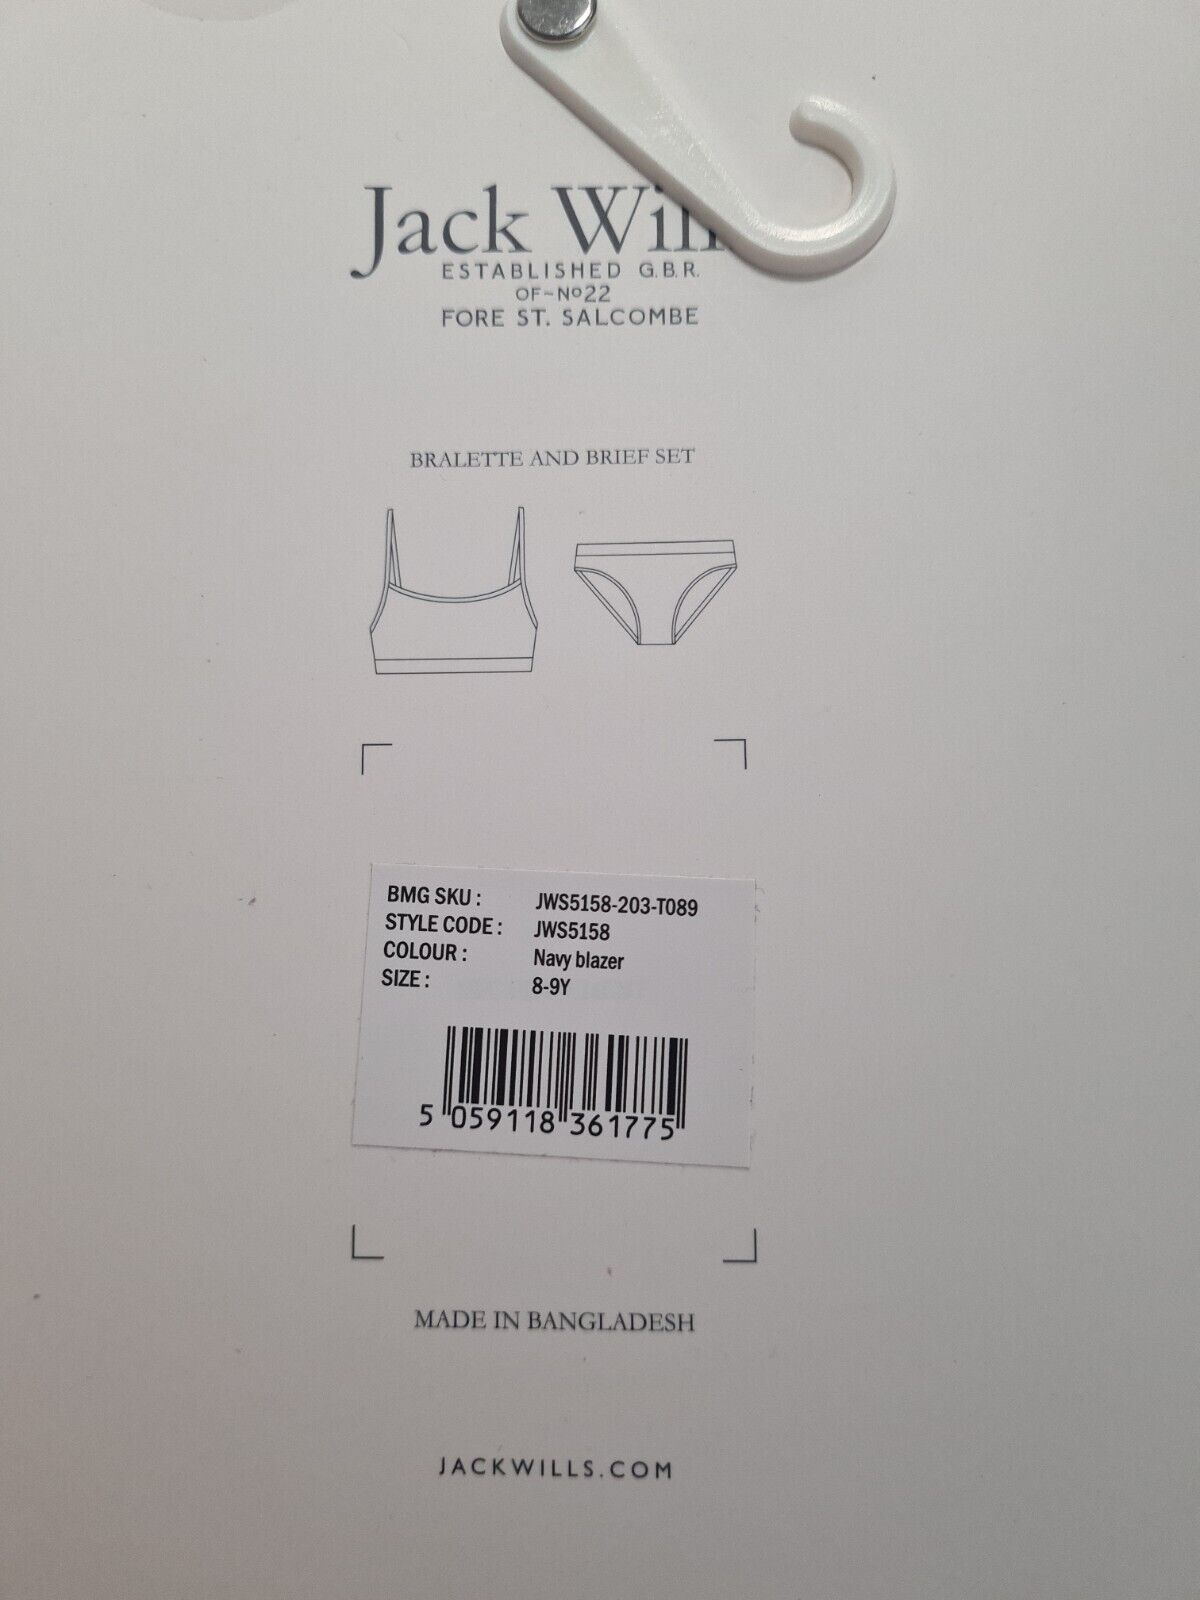 Jack Wills Bralette And Brief Set Soft Touch Cotton Size 8-9 Years **** VA1